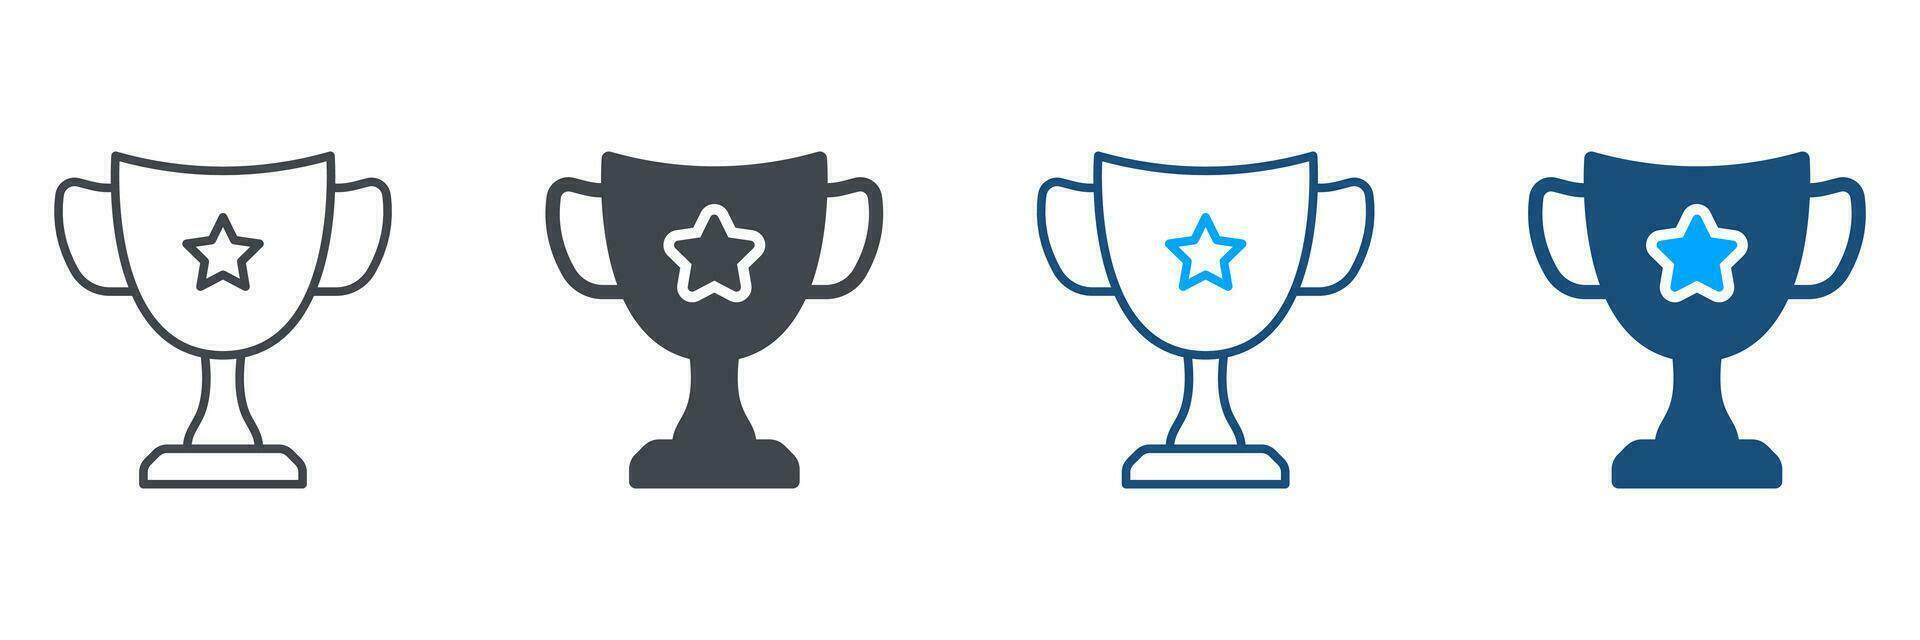 Trophy Cup for Winner Silhouette and Line Icon Set. Successful in Contest. Award in Sport Championship, Leadership, Champion Prize Symbol Collection. Goblet Pictogram. Isolated Vector Illustration.